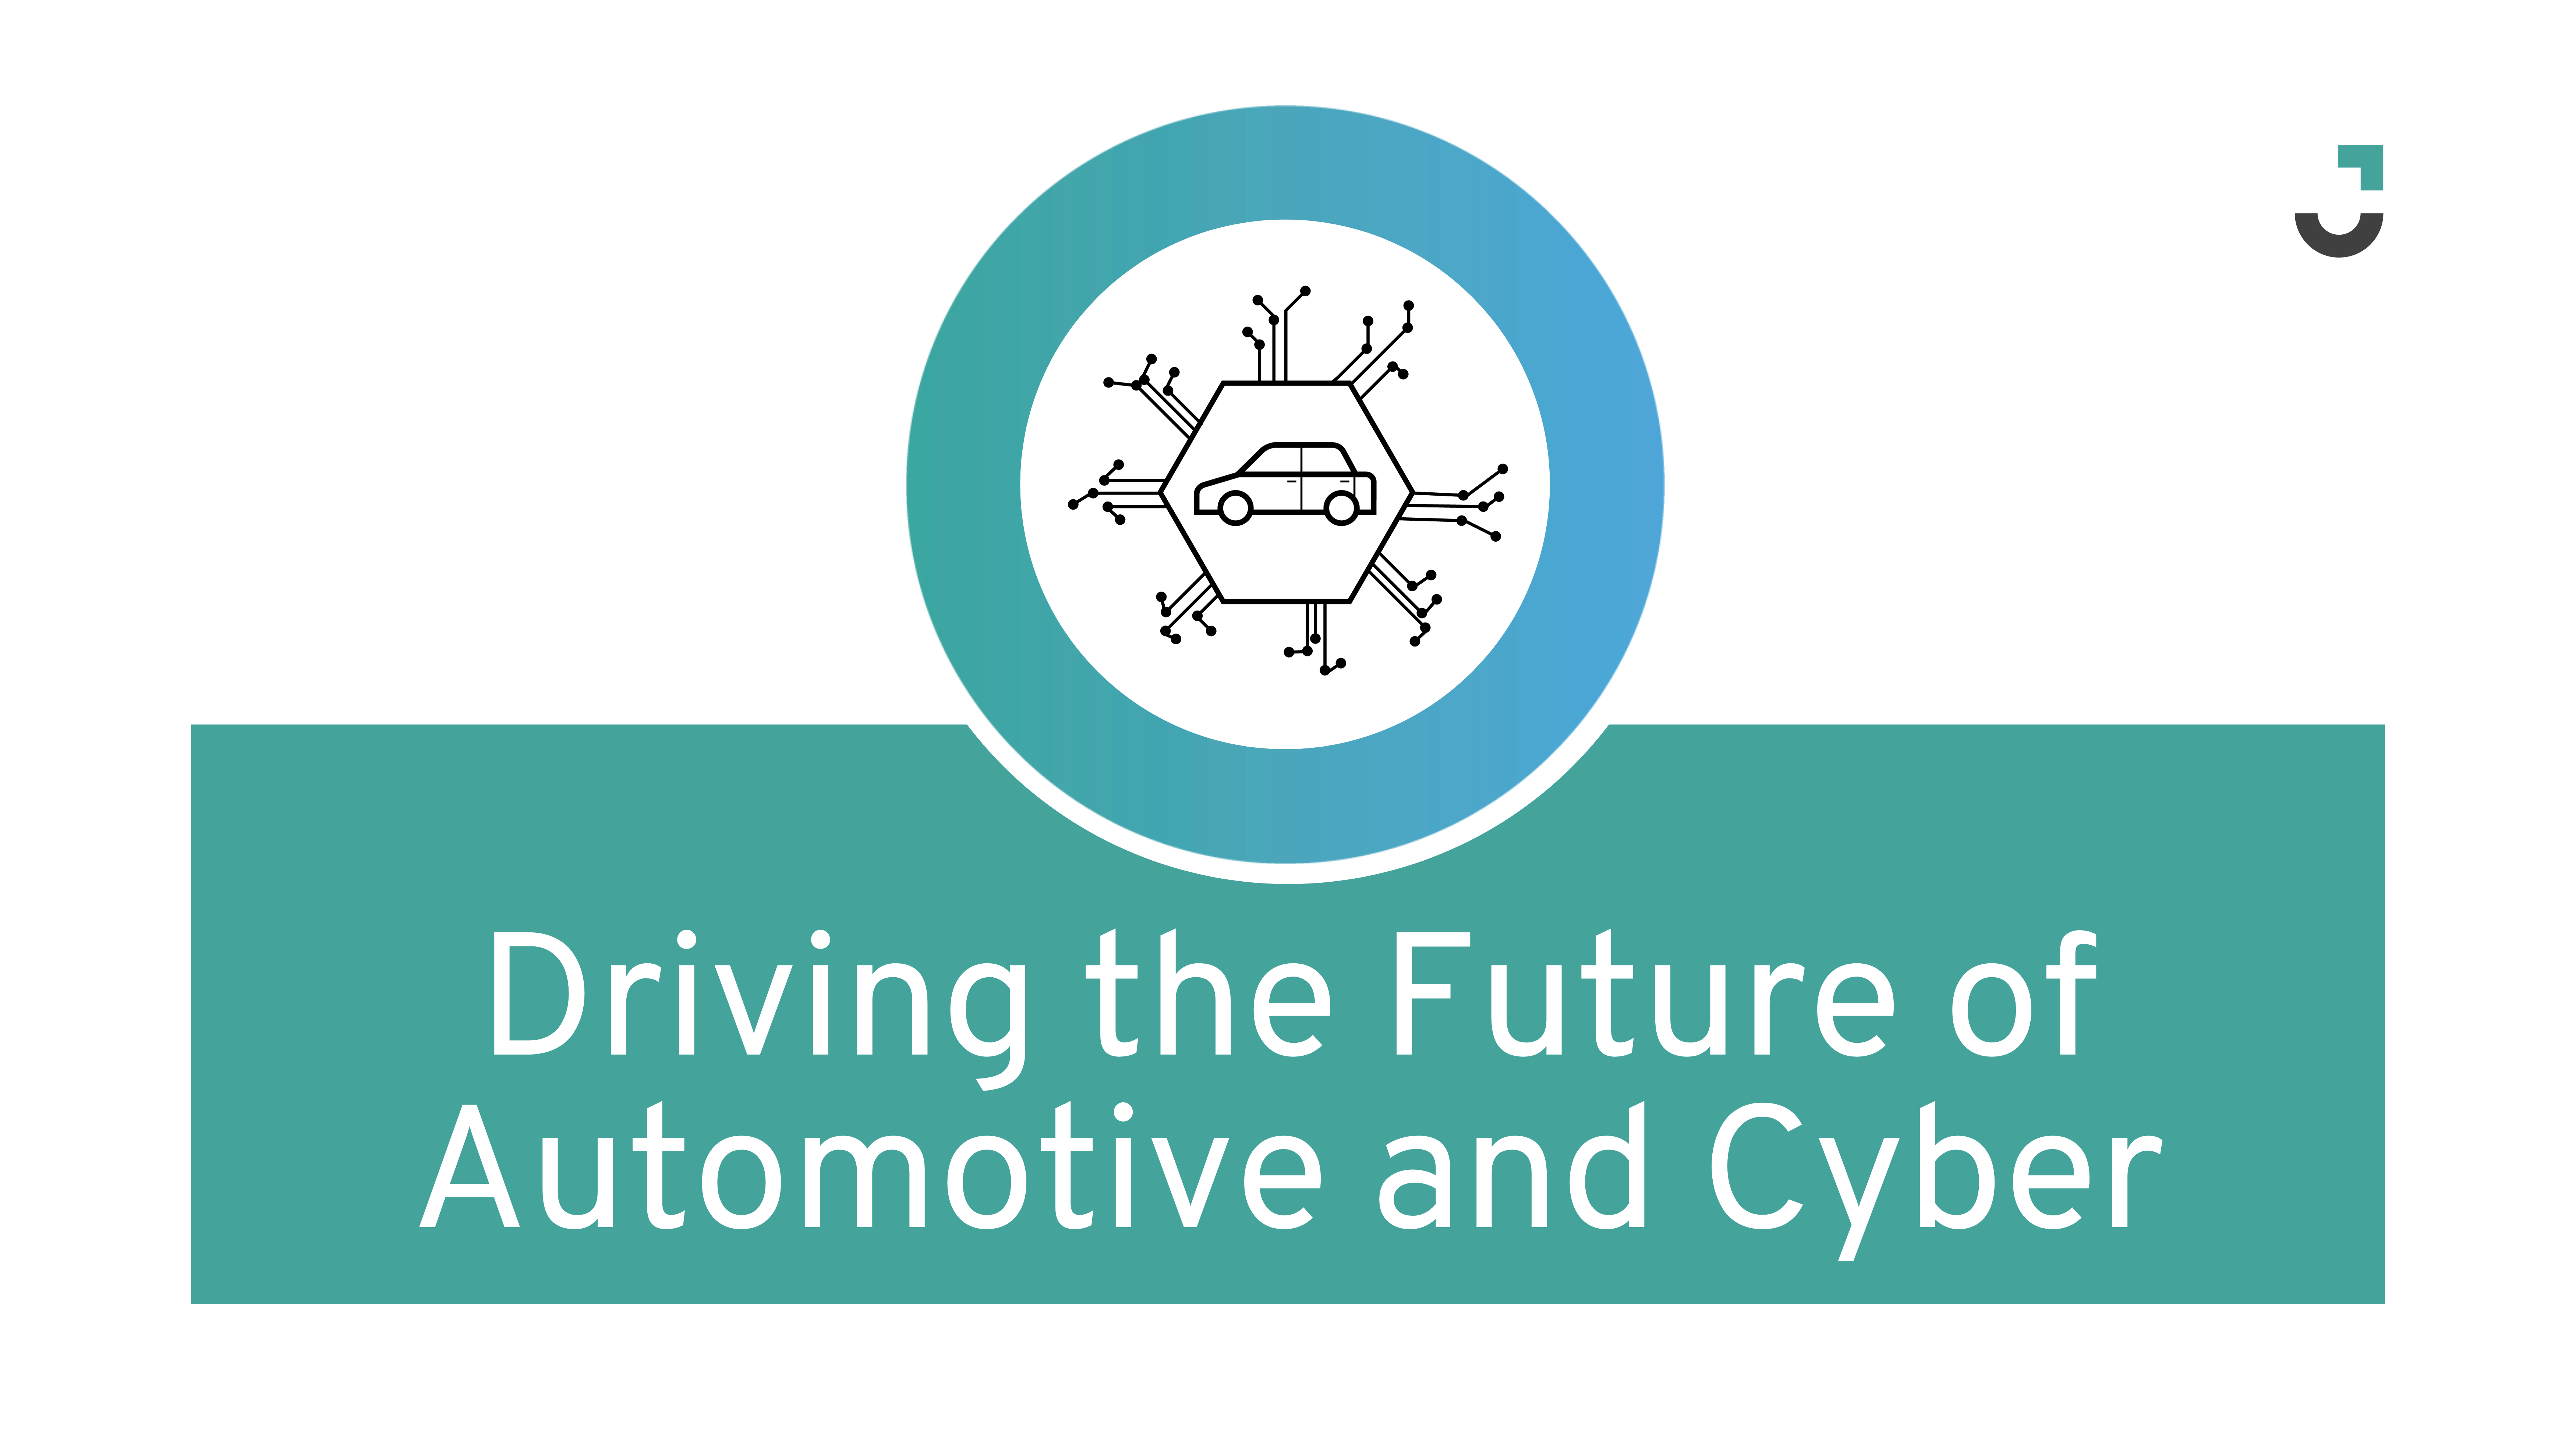 Driving the Future: How Automotive and Cyber Converge with Job.com